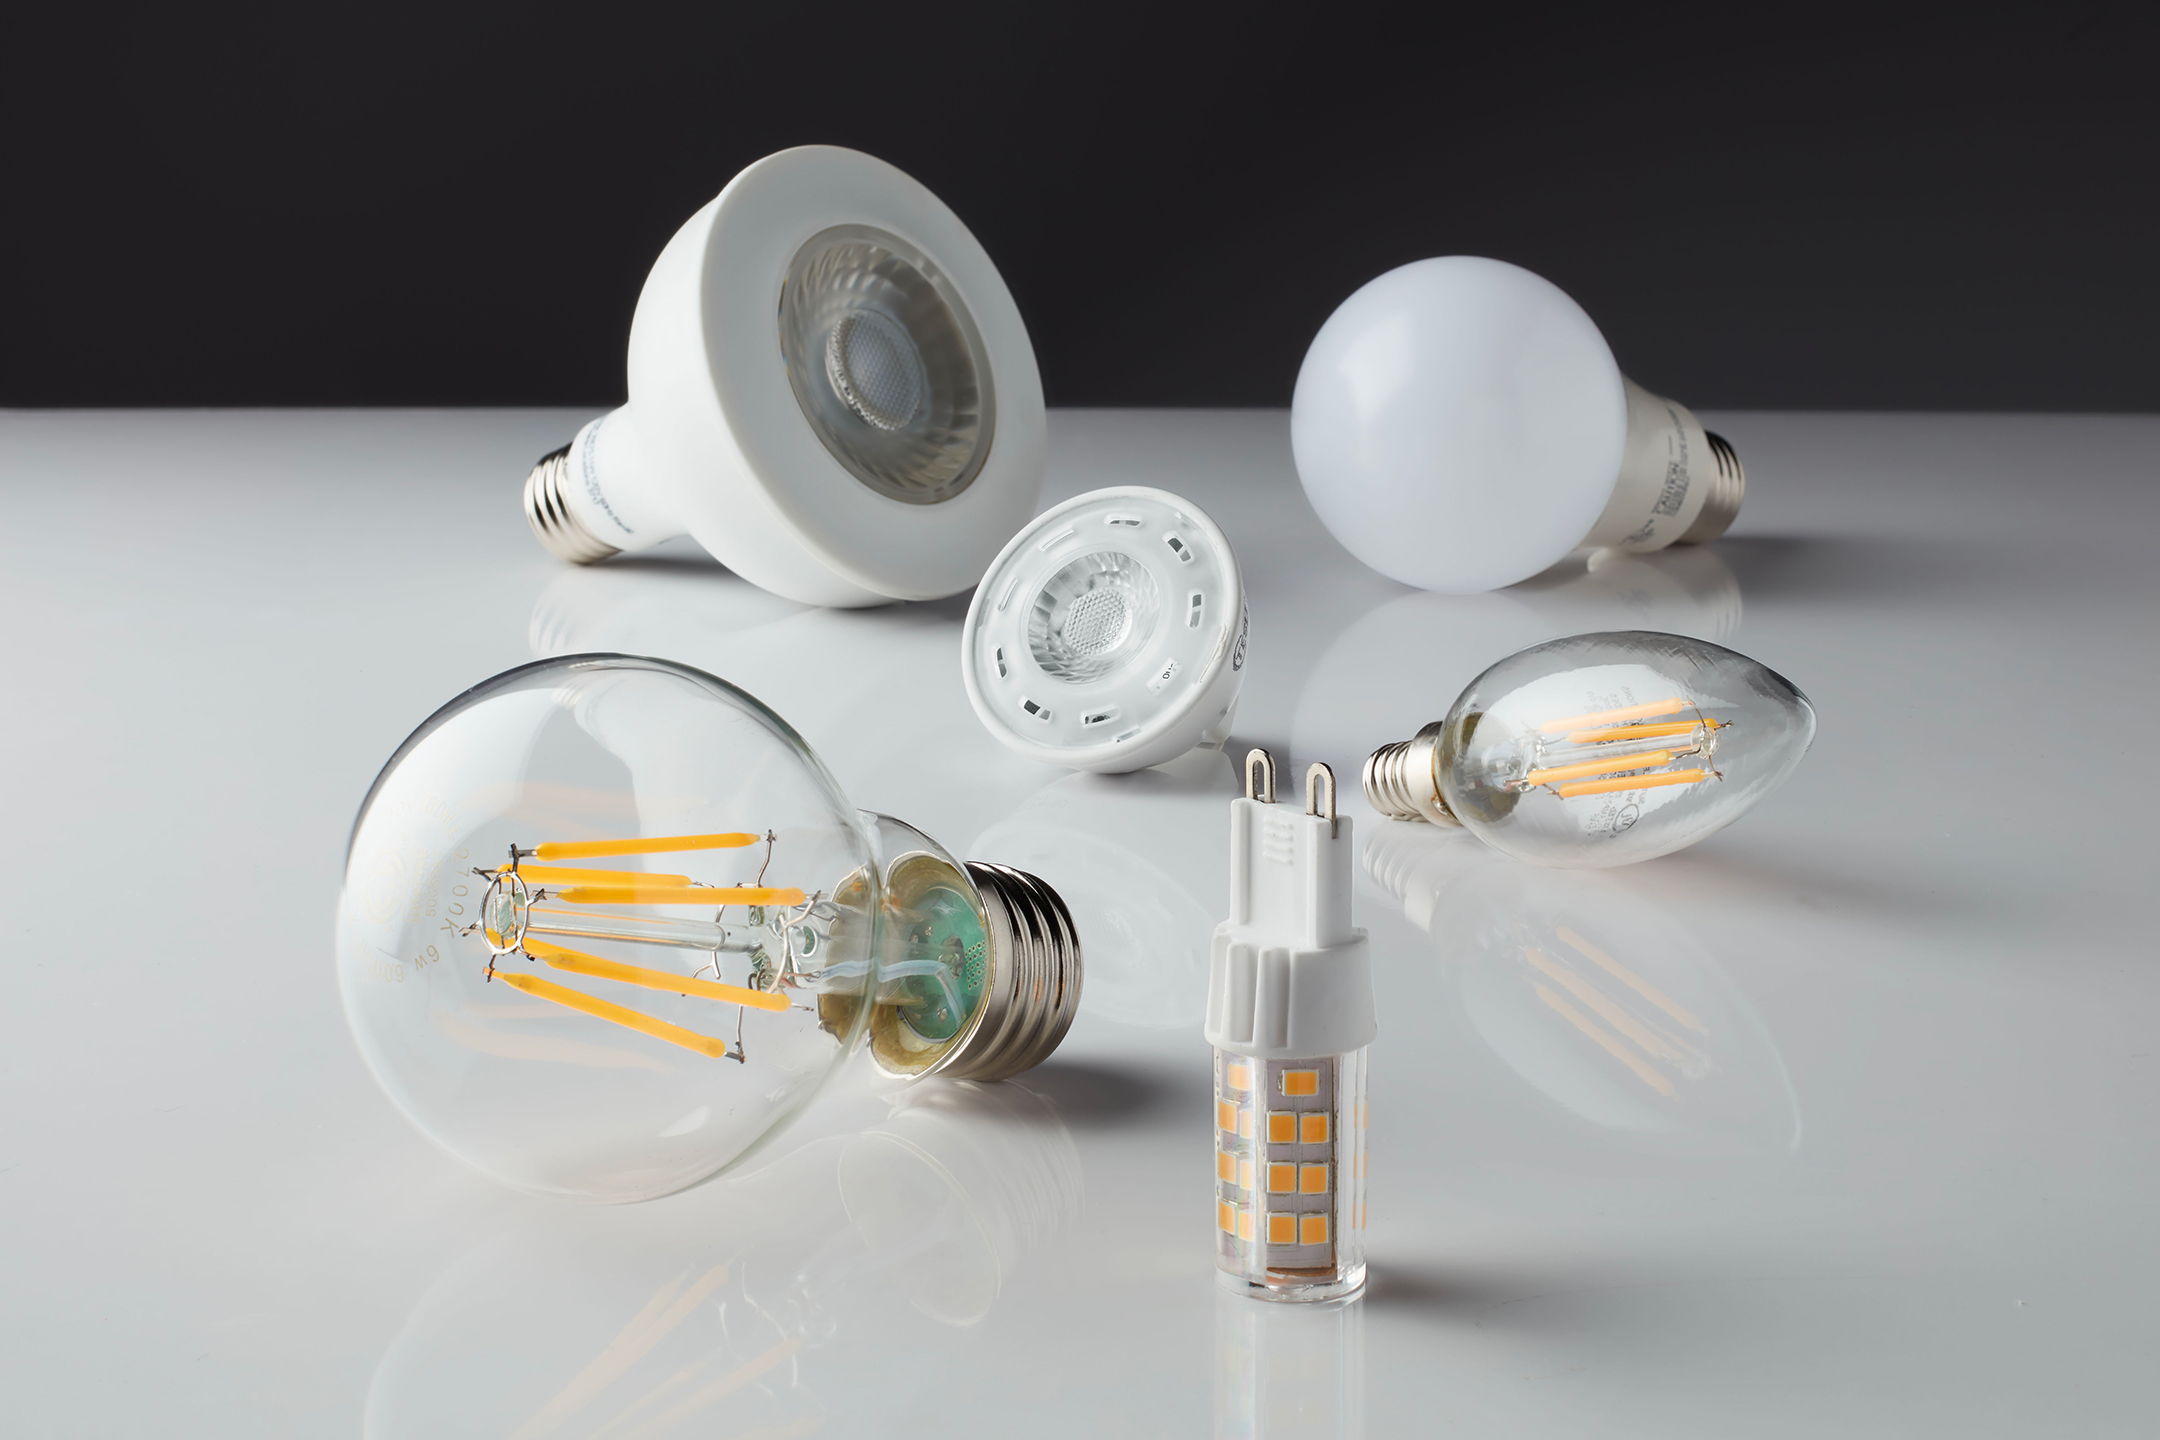 The Most Common Light Bulb Questions A, What Are The Best Light Bulbs For A Vanity